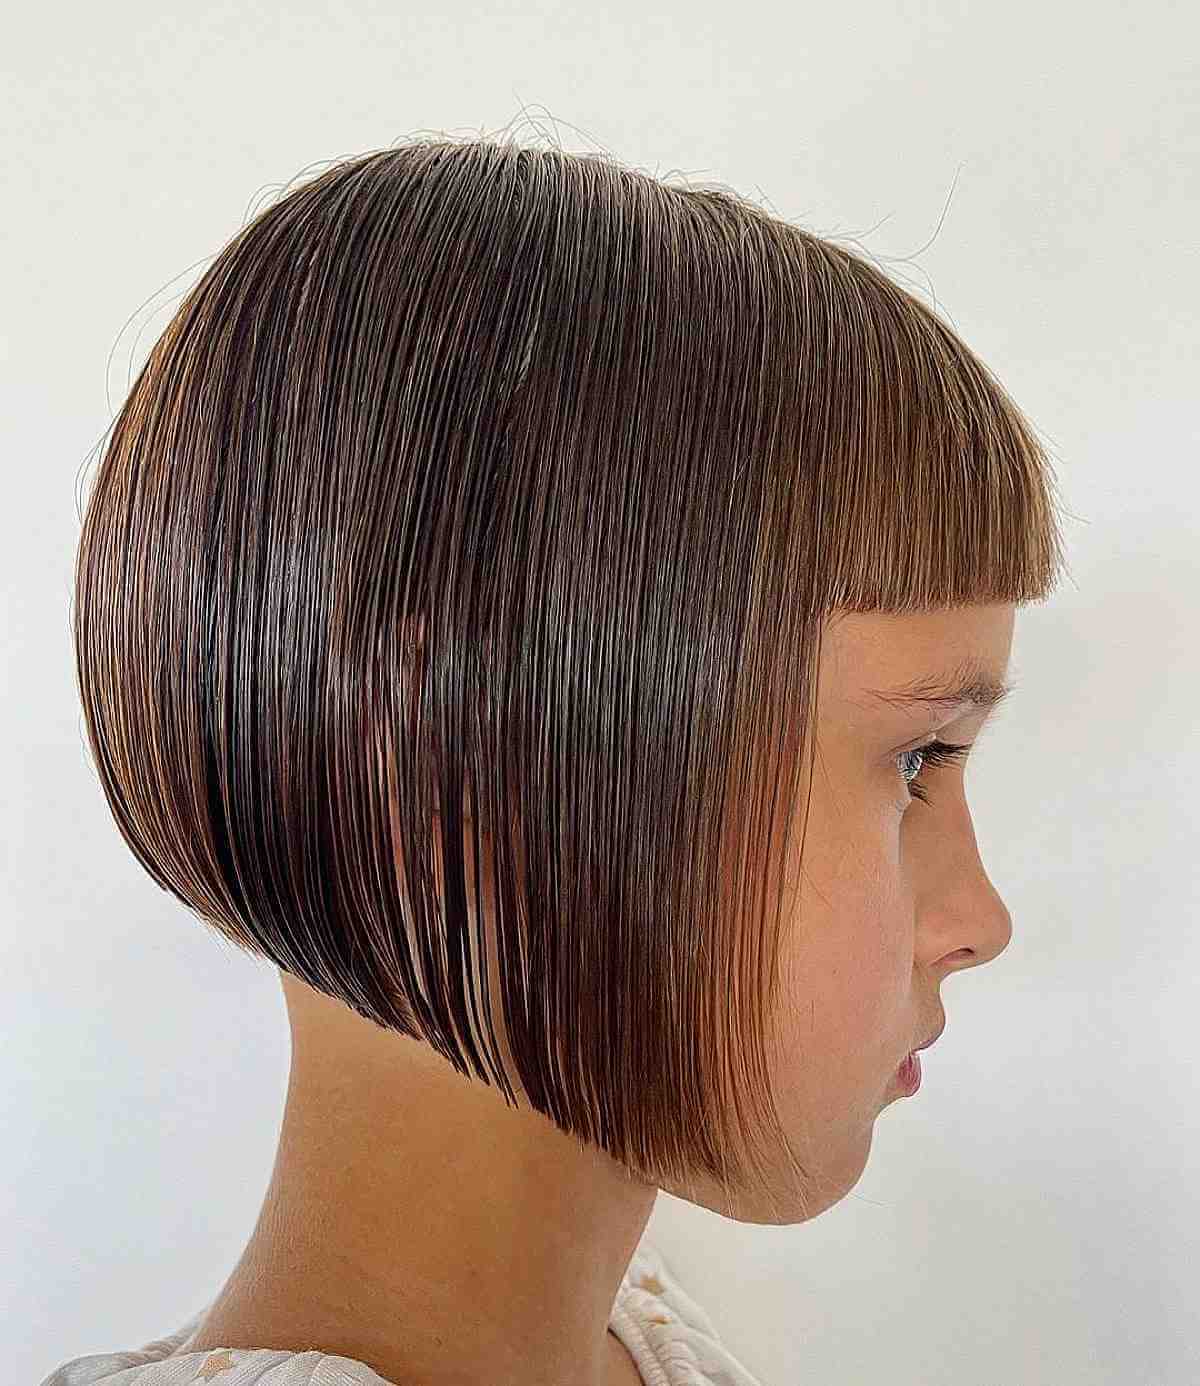 Perfectly Cut Short Bob with Bangs for Little Girls